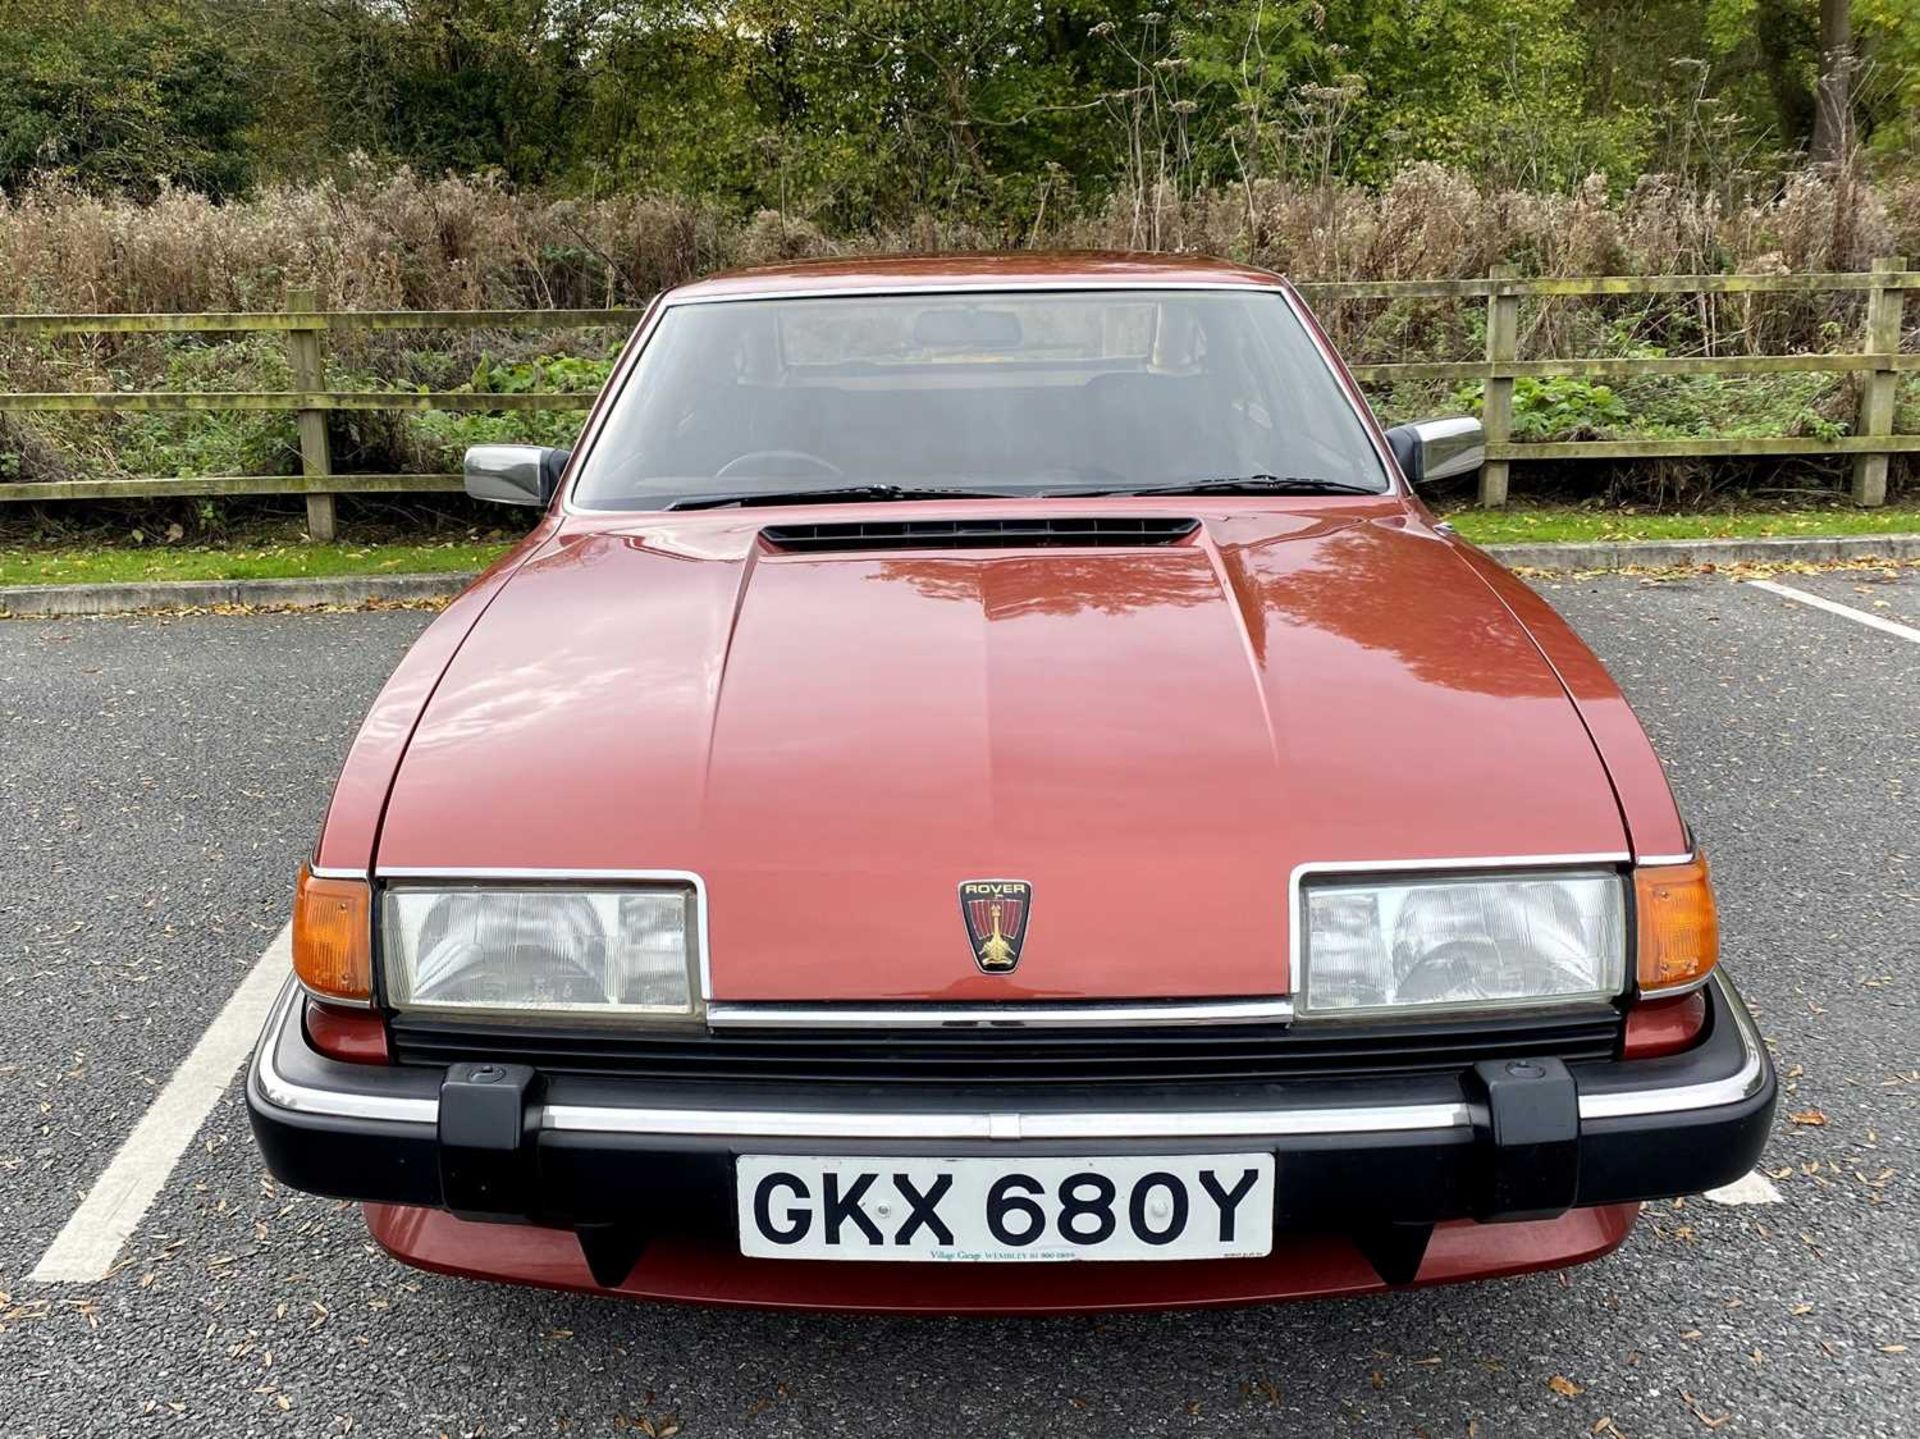 1982 Rover SD1 3500 SE Only 29,000 miles - Image 14 of 100